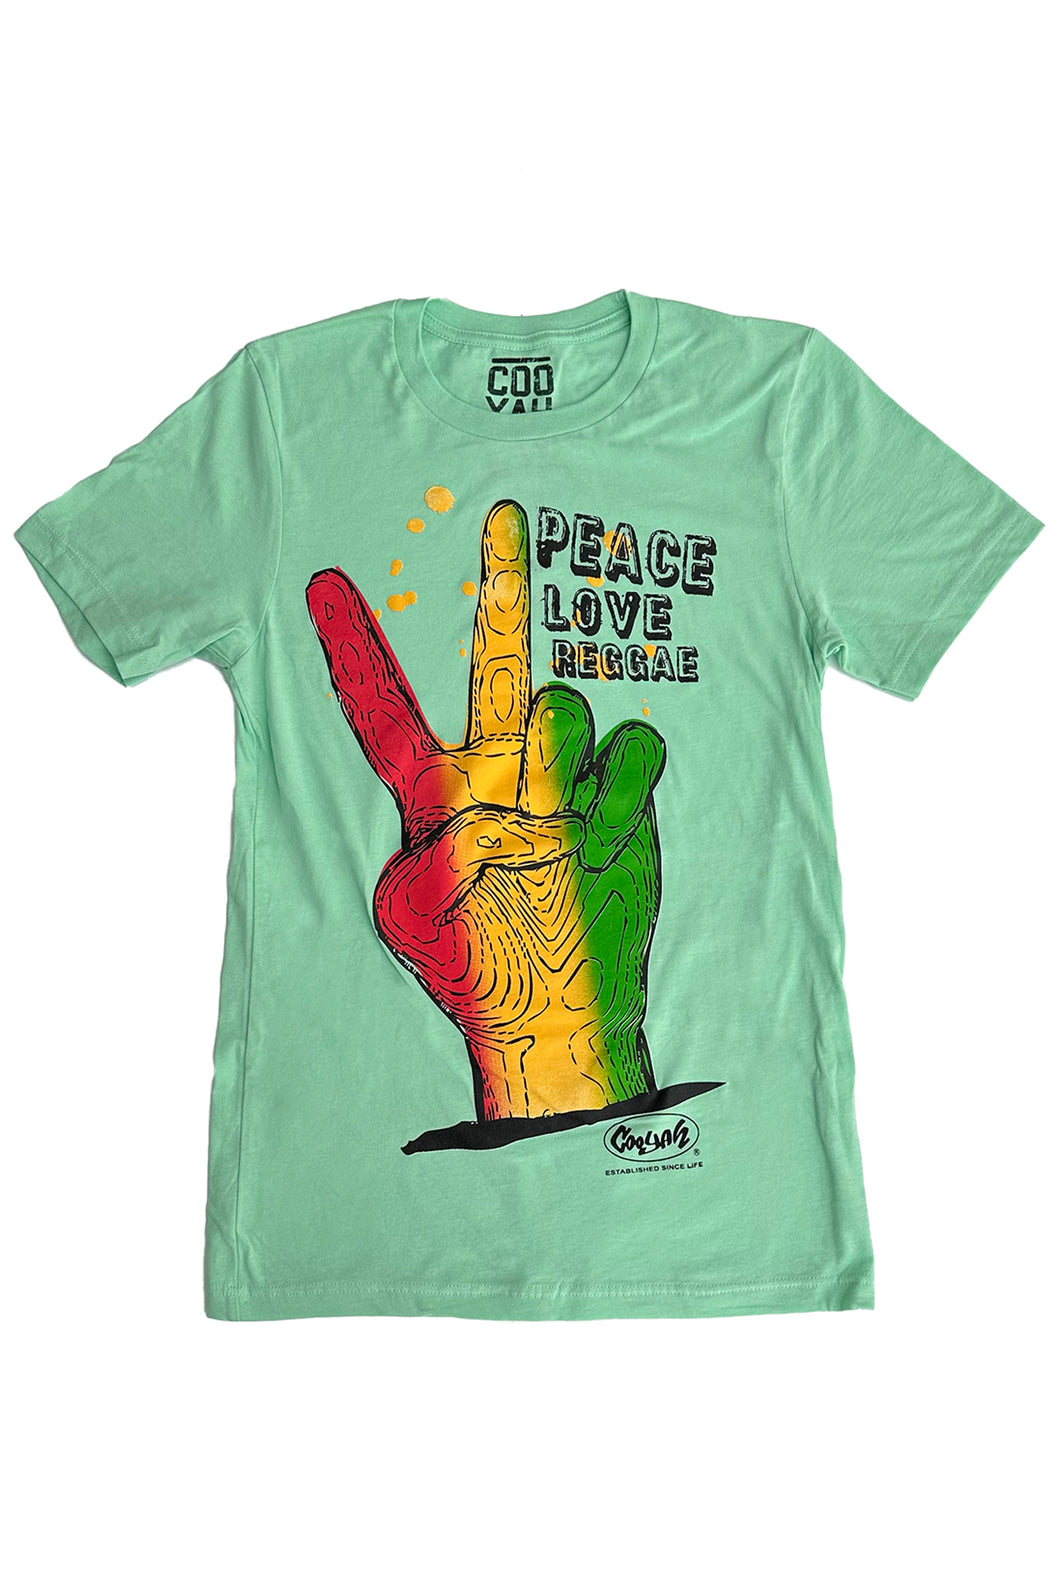 Cooyah. Peace Love Reggae. Men's graphic tee with peace symbol. We are a Jamaican owned clothing brand. Established in 1987.